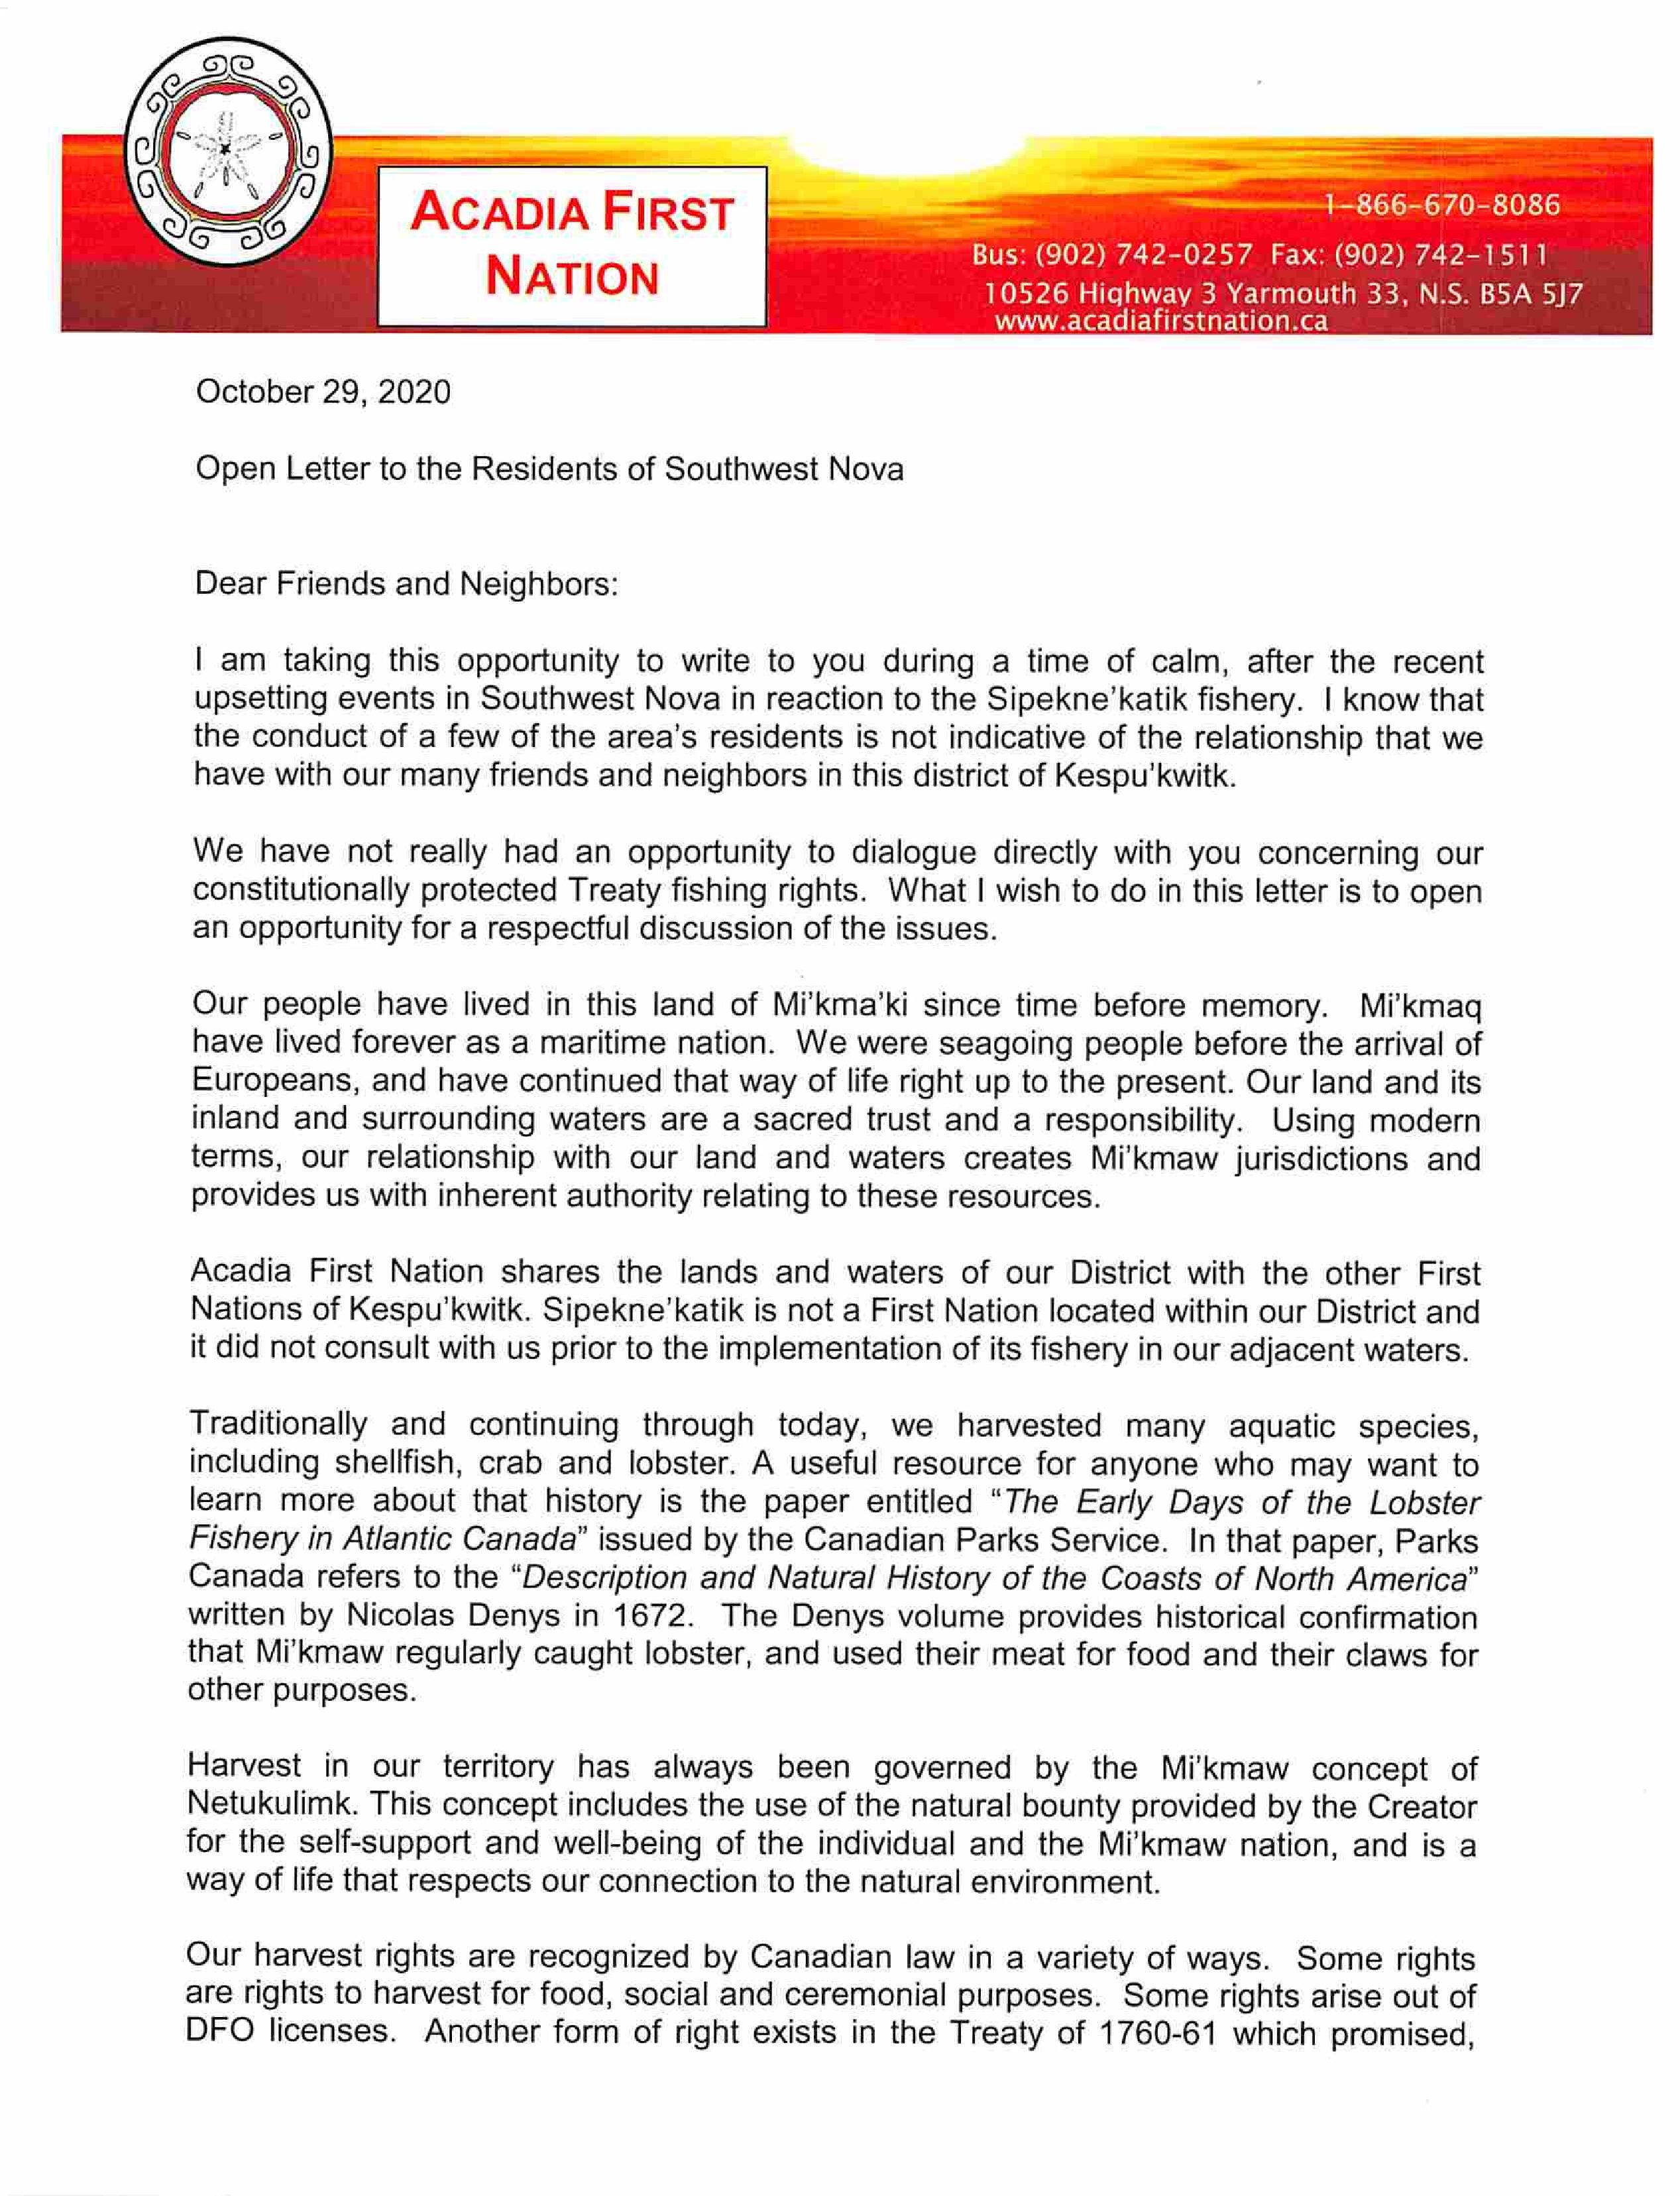 Open Letter from Acadia First Nation page 001